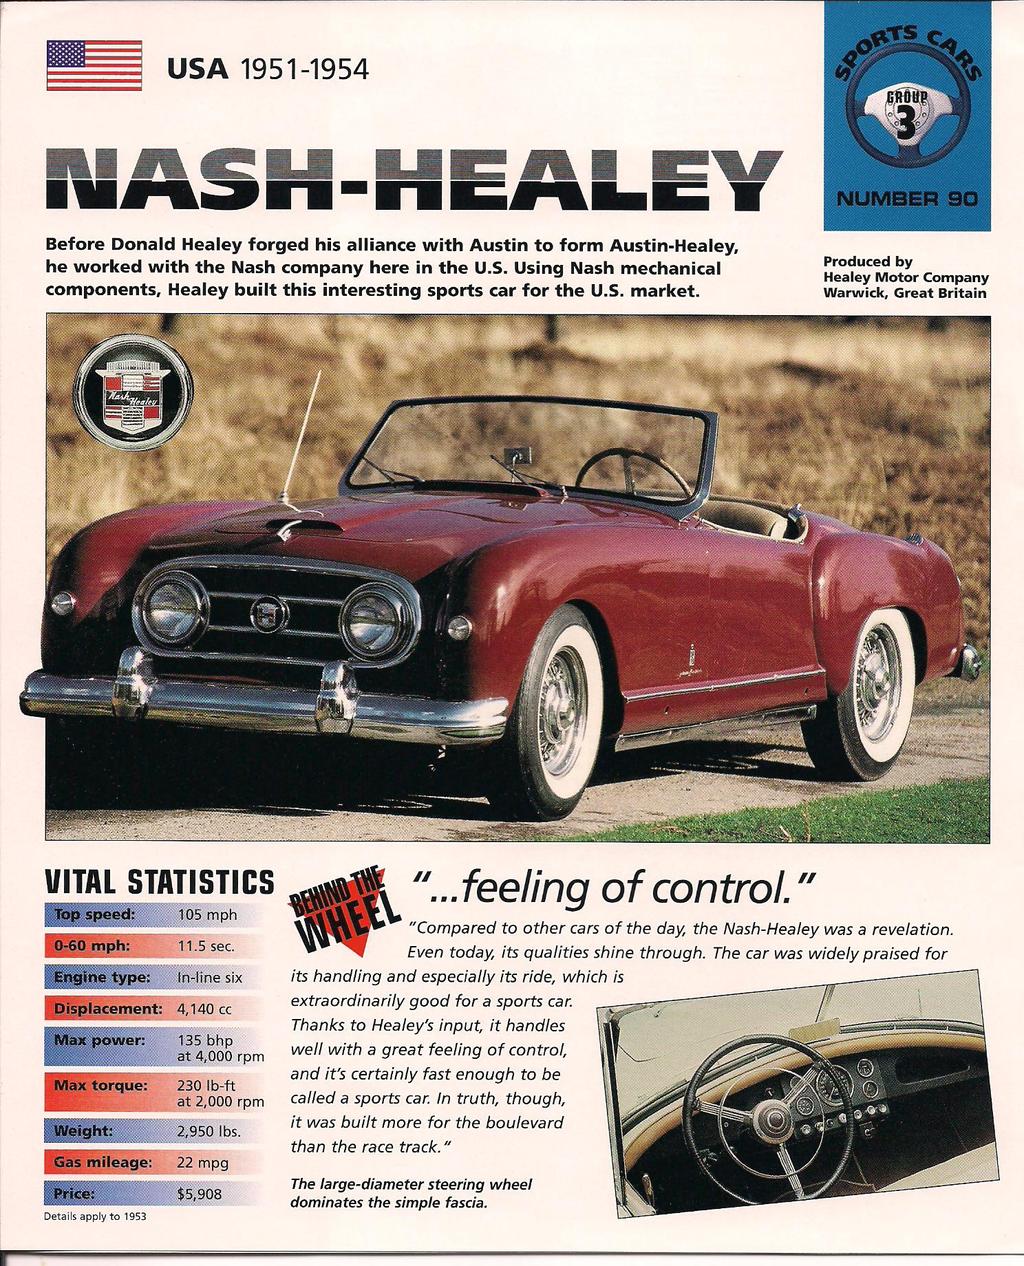 APRIL 2010 358 NEWSLETTER Registry update We now have know of a total of 358 Nash Healeys.